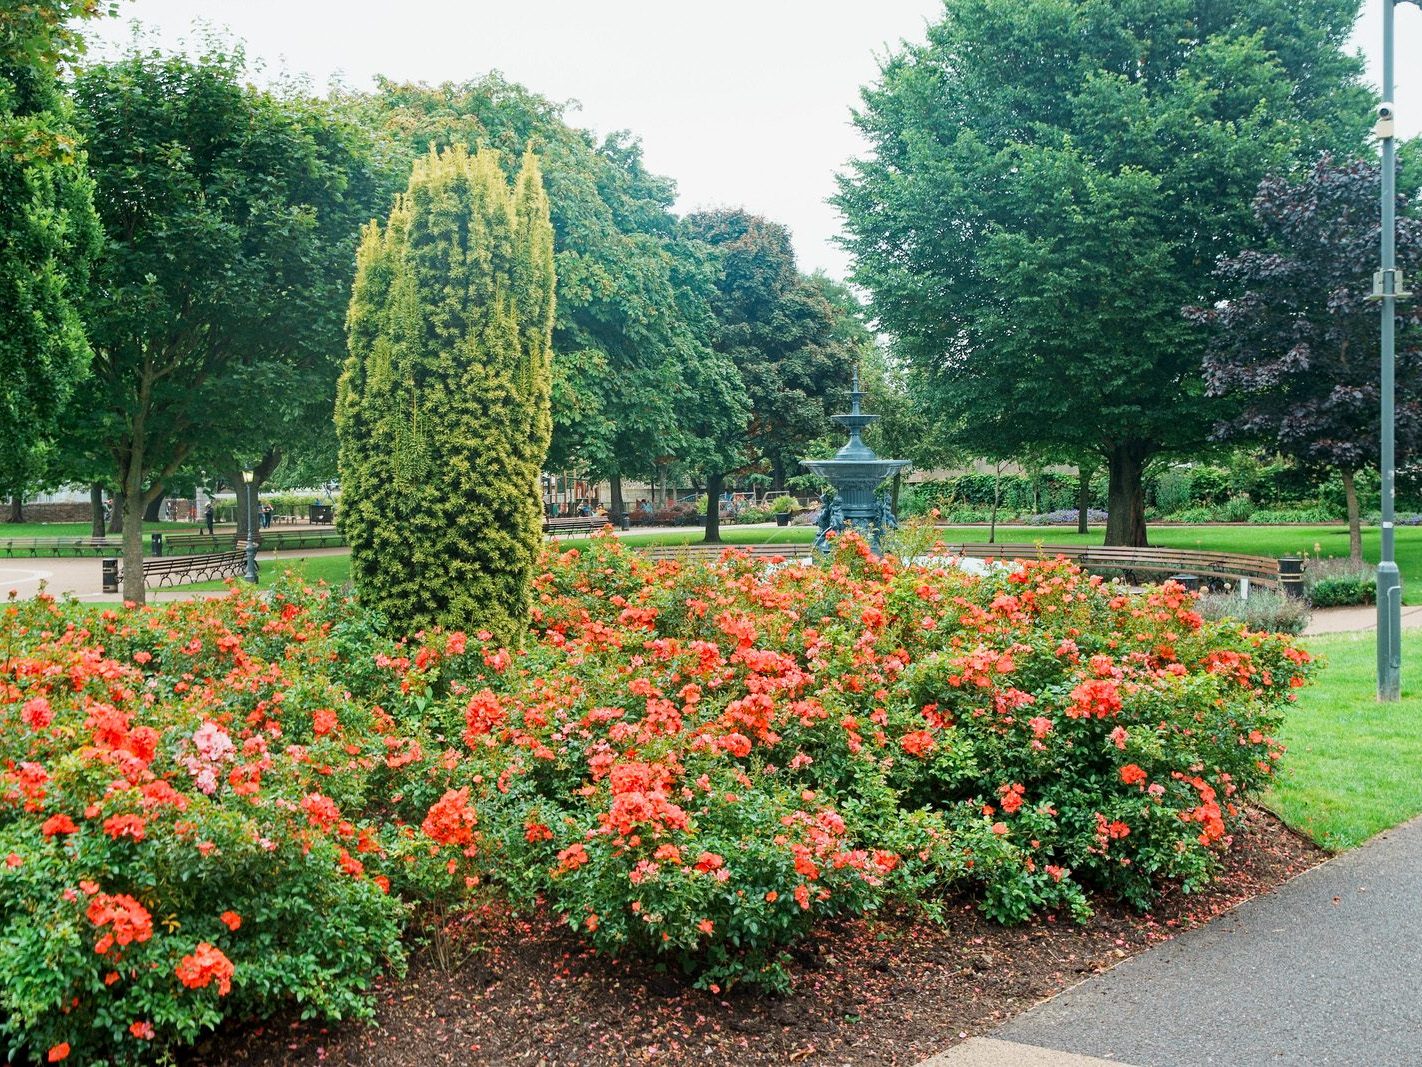 I REALLY LIKE THE PEOPLE'S PARK [AN ATTRACTIVE PUBLIC SPACE IN DUN LAOGHAIRE] 012